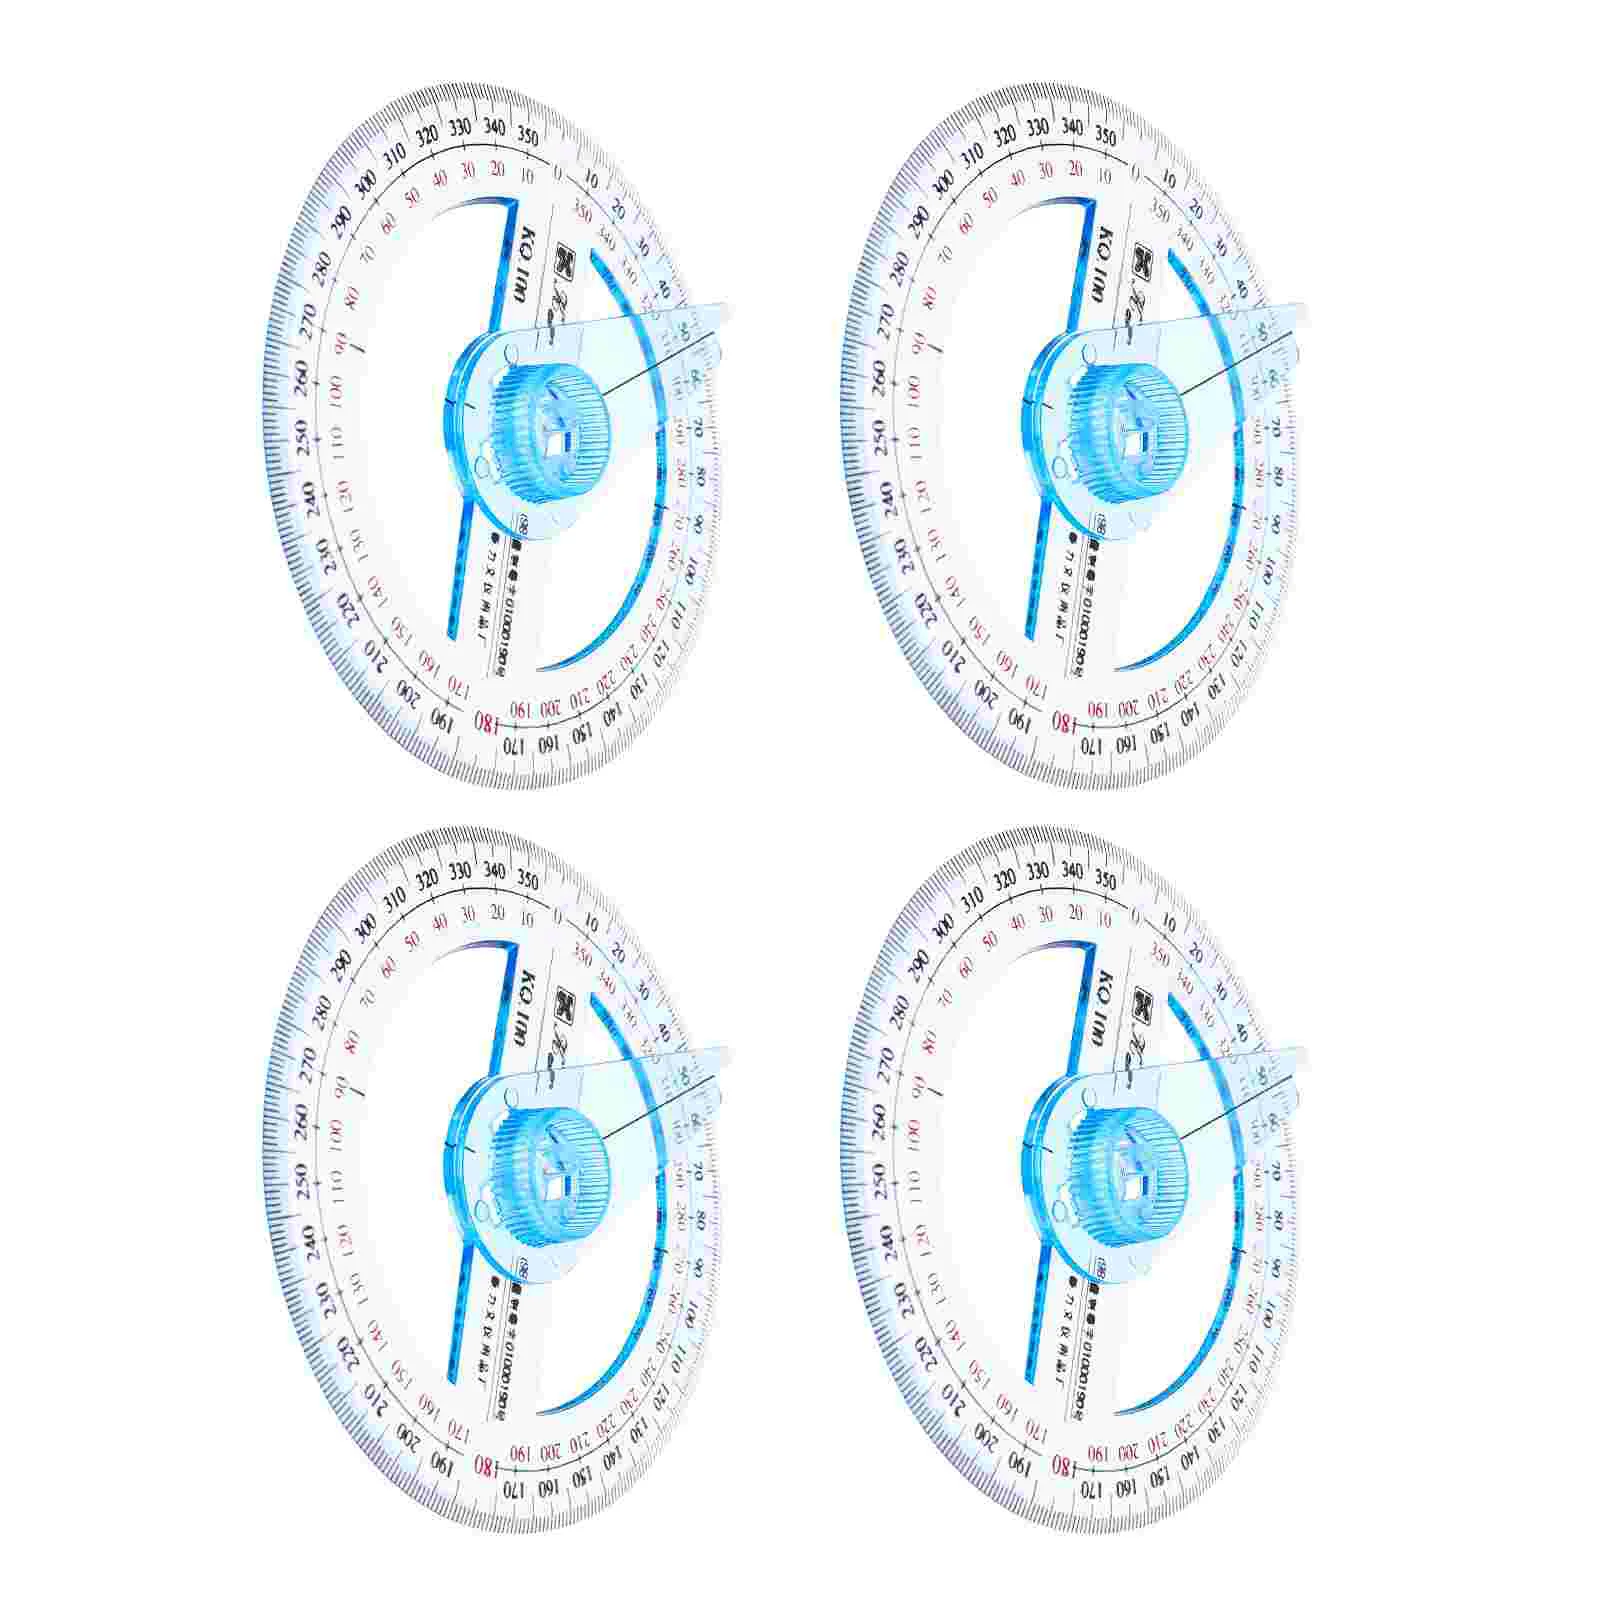 4Pcs Professional Plastic Circle Protractor Math Geometry Measuring Circle Ruler for Students 360 degrees protractor with swing arm full circle pointer angle ruler math geometry drafting tools for students design линейка